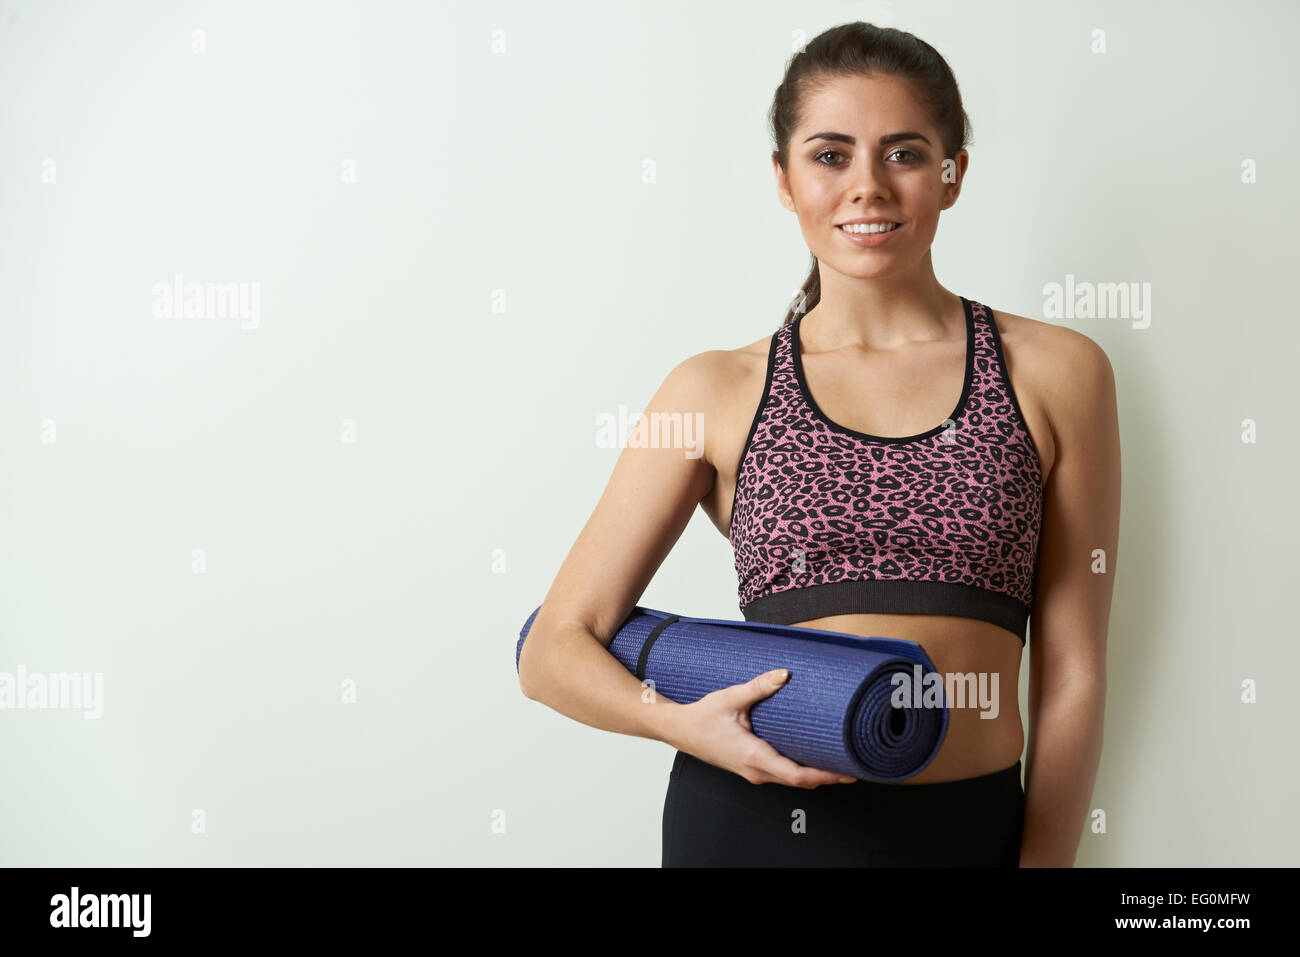 Young Woman In Sportswear Carrying Exercise Mat Stock Photo